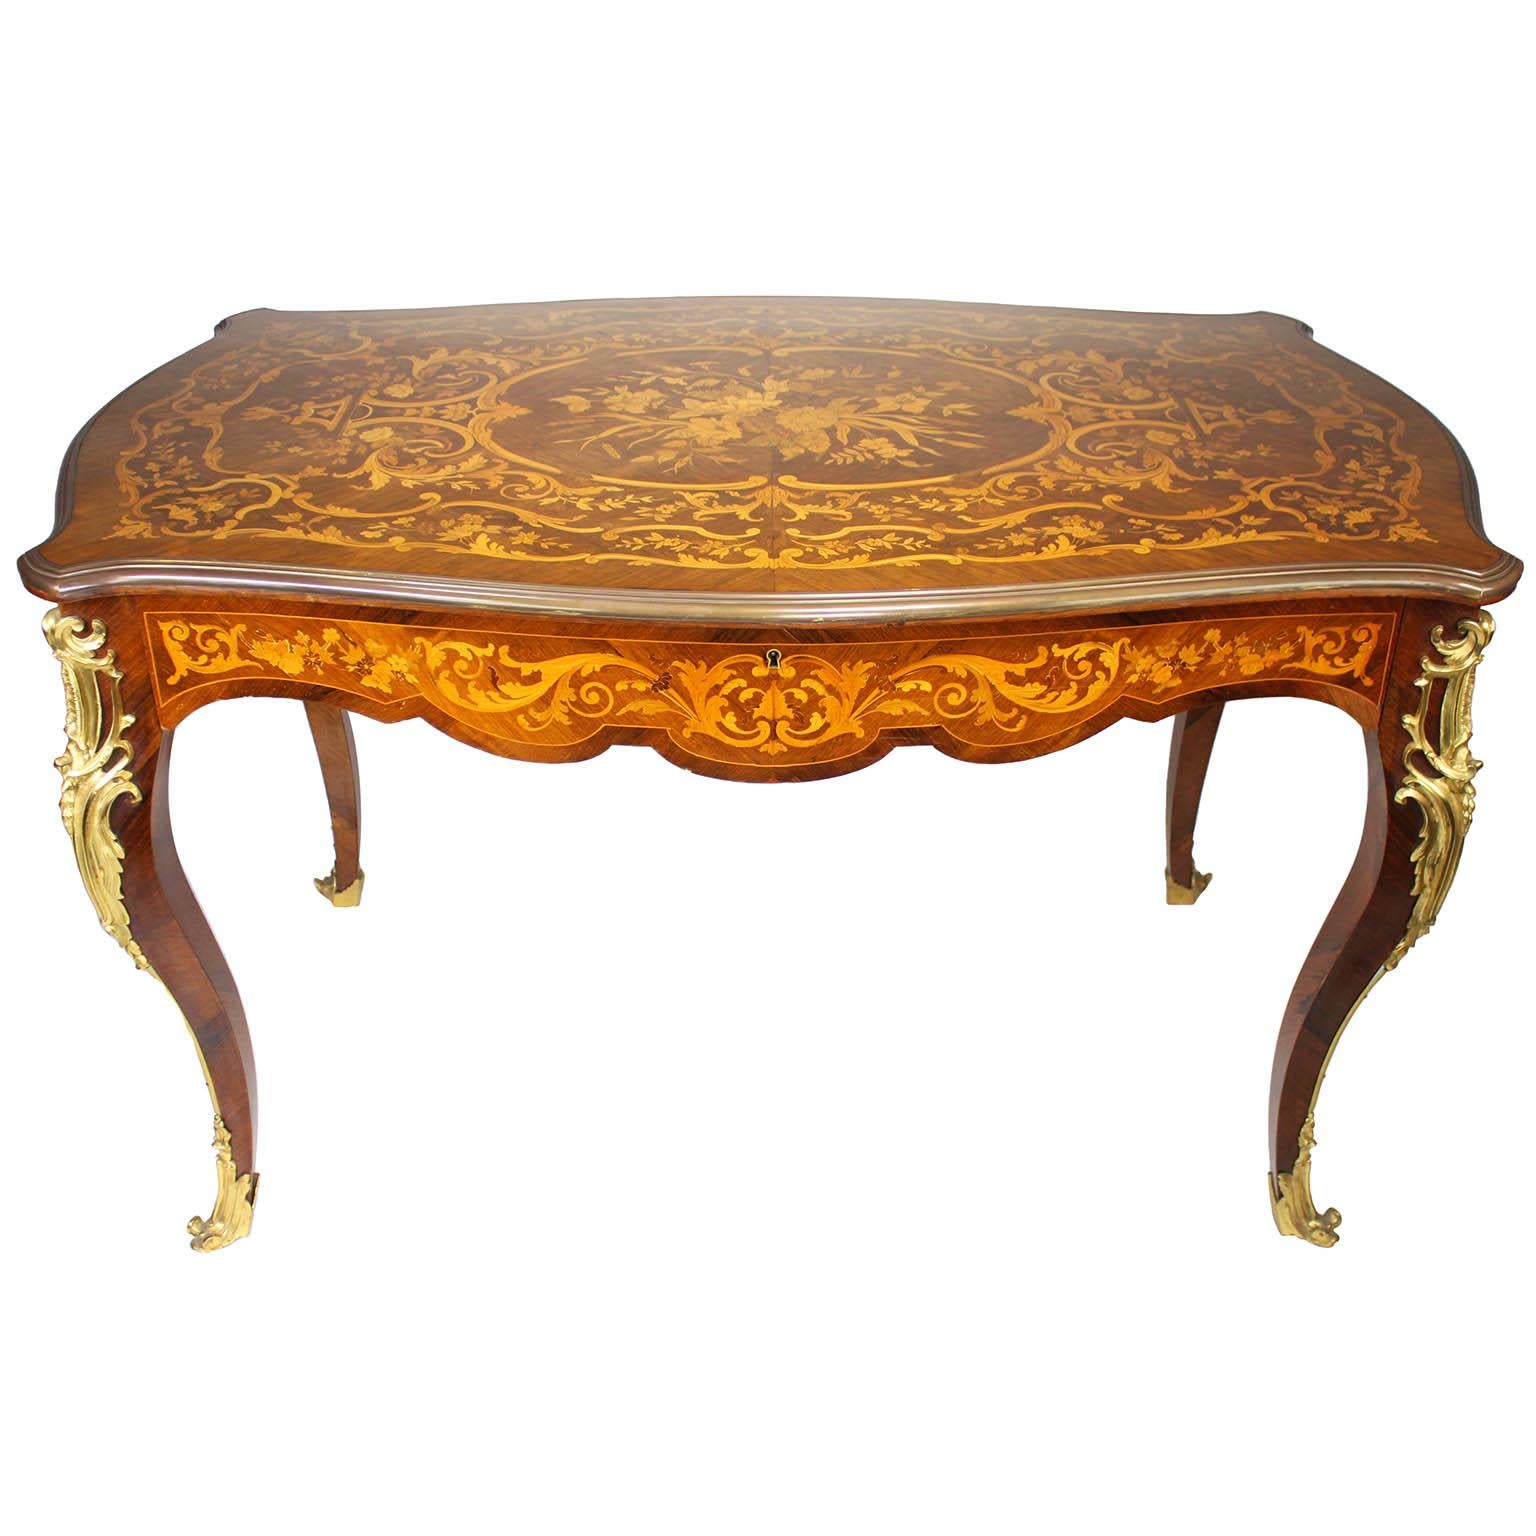 Gilt A French 19th/20th Century Louis XV Style Tulipwood Marquetry Writing Table/Desk For Sale